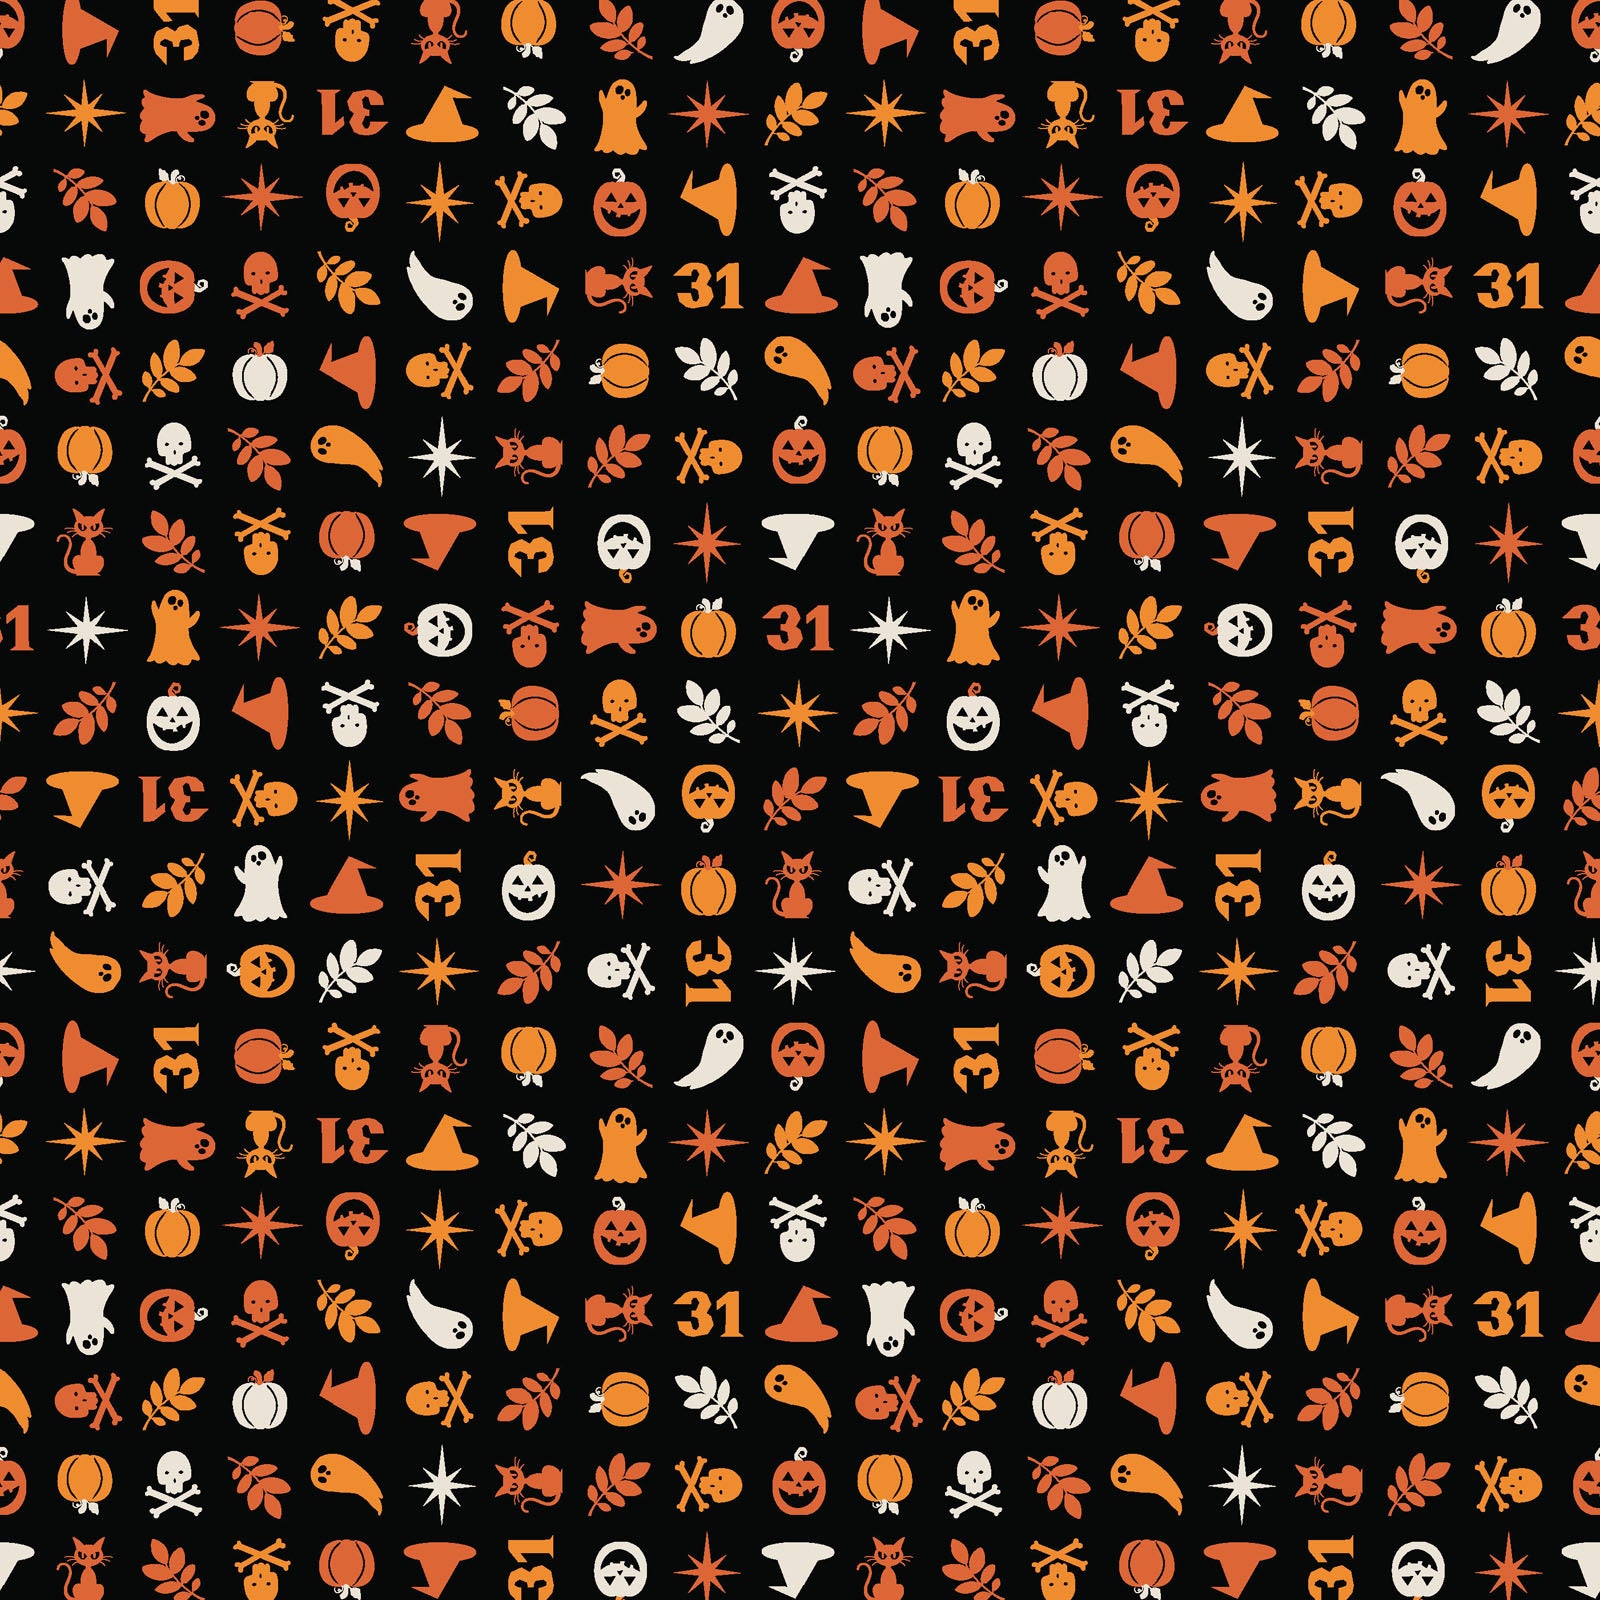 The Halloween Charms print in black (MAS10573-J) from the Pumpkin and Potions line by Kimberbell for Maywood Studio features pumpkins, witch hats, ghosts, cats, spiders and more. Photo shows details of the designs.